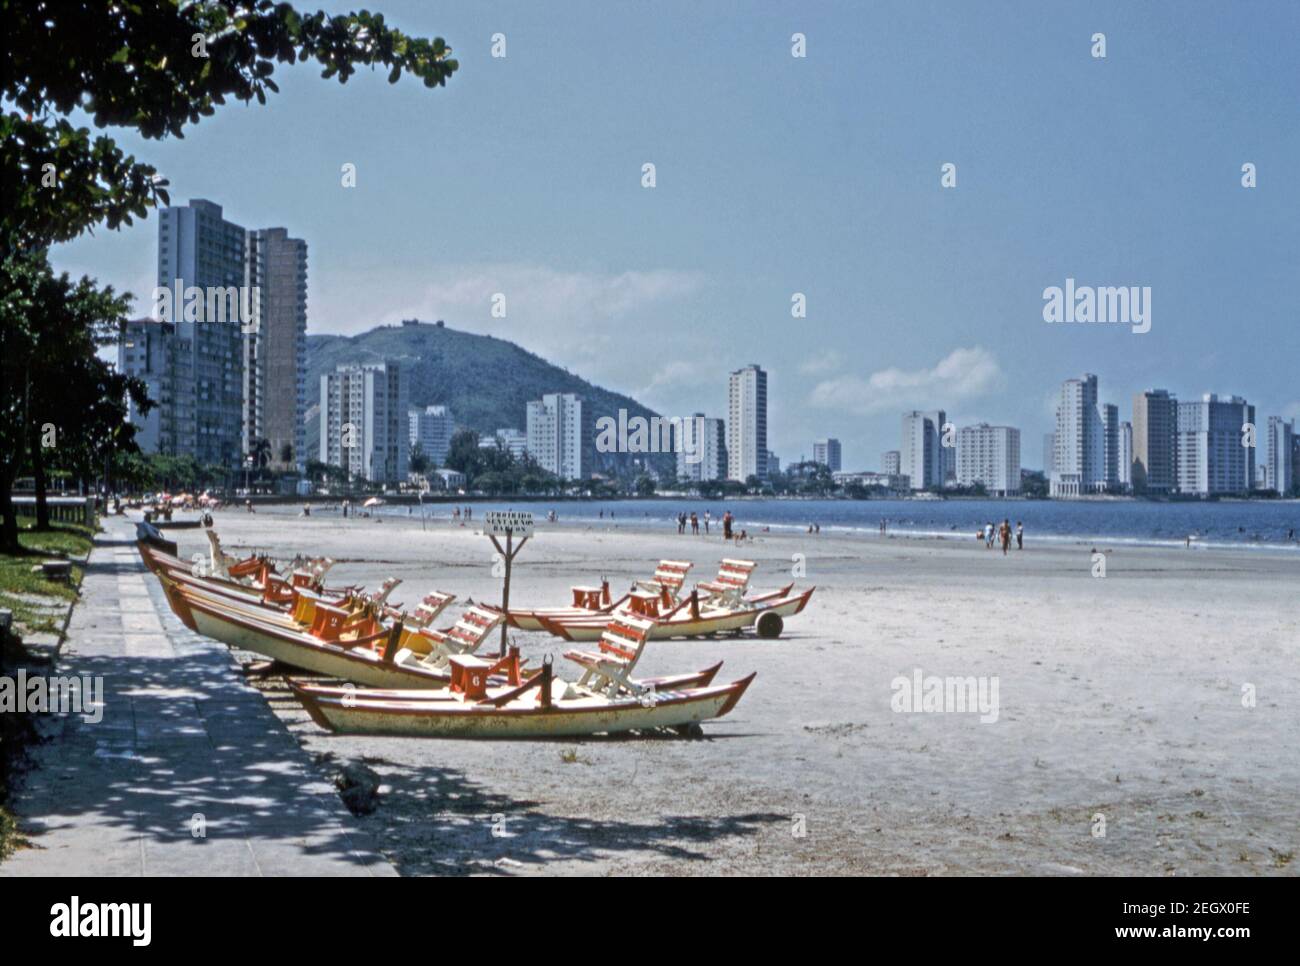 The beach front at Santos, Brazil 1961. High-rise apartment blocks dominate the beach-front scene even in the early 1960s. Rowing boats (barcos) are available for hire. Santos is a city in the Brazilian state of São Paulo, founded in 1546 by the Portuguese nobleman Brás Cubas. It is located mostly on the island of São Vicente, which is home to both the city of Santos and the city of São Vicente, and partially on the mainland. This image is from an old amateur 35mm colour transparency. Stock Photo